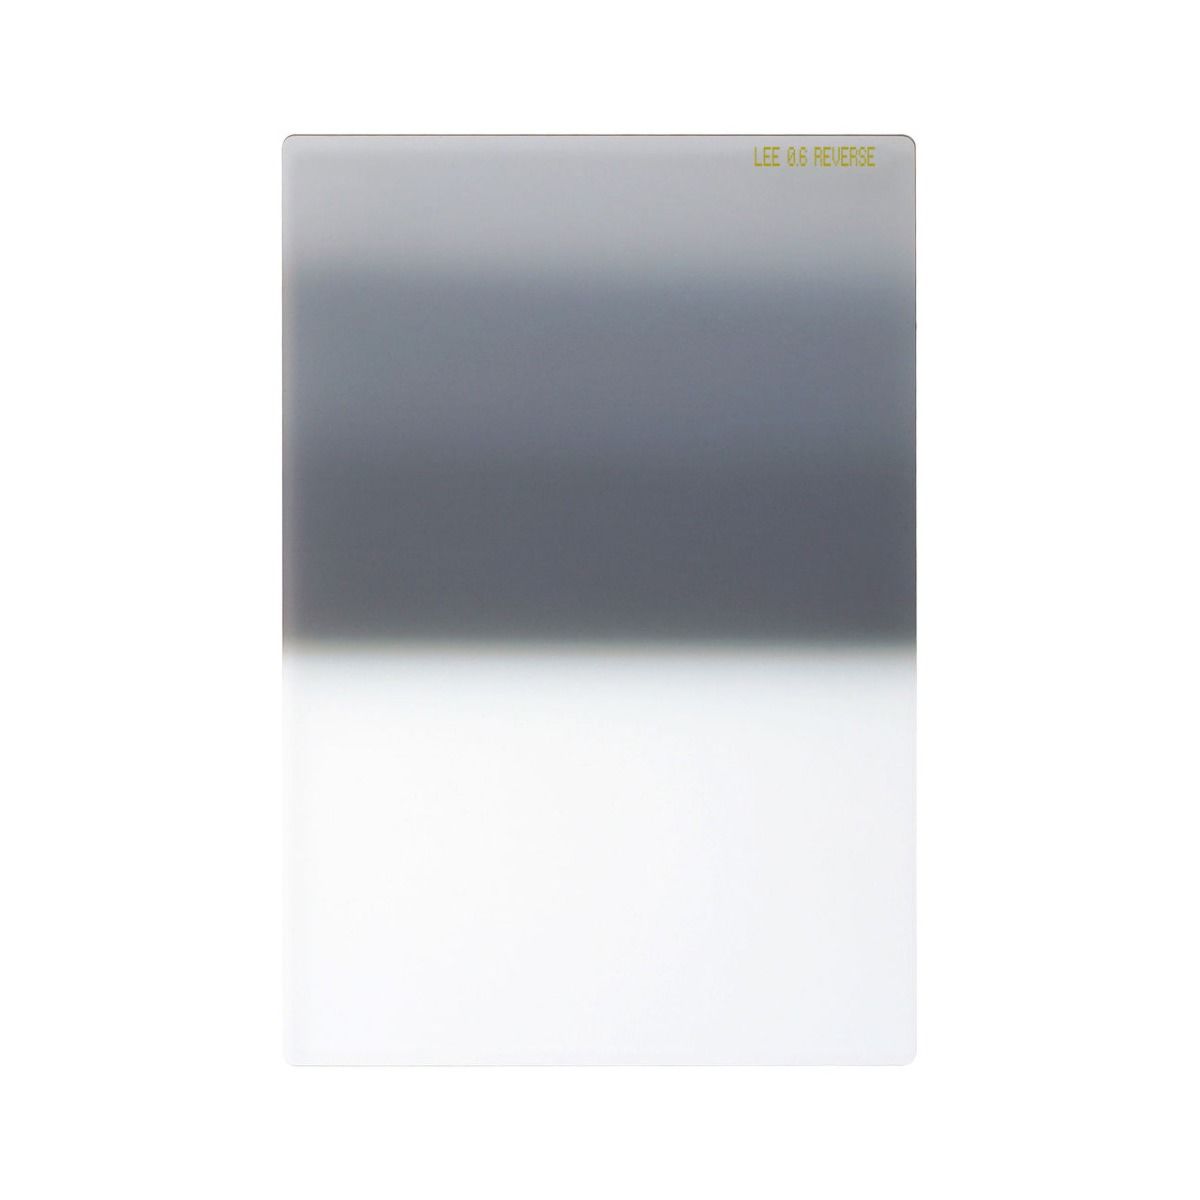 LEE Filters SW150 Reverse Graduated Neutral Density Filter 150x170Mm 0.6 ND 2 Stops